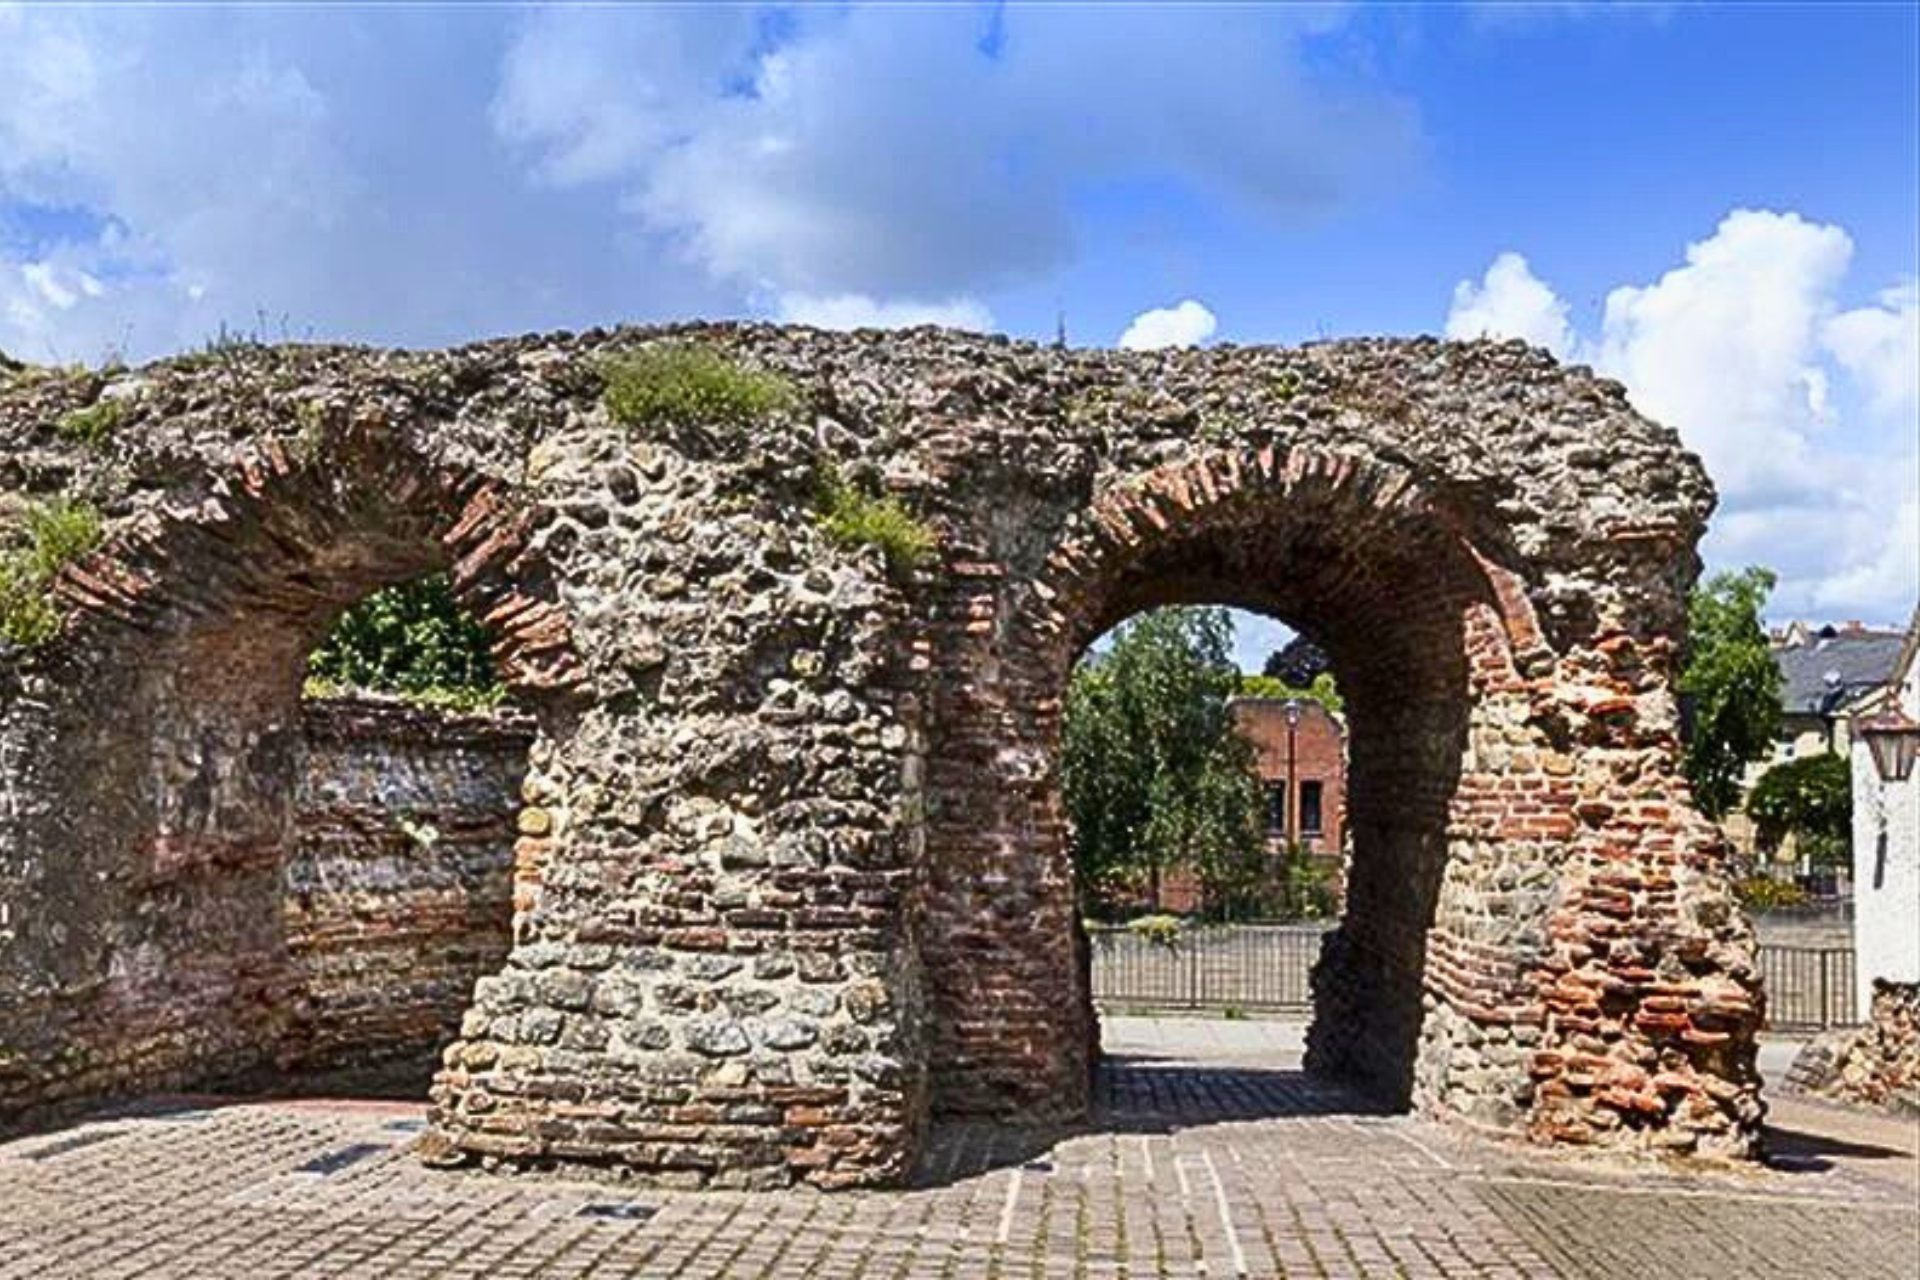 A section of a Roman wall still standing in Colchester, England.